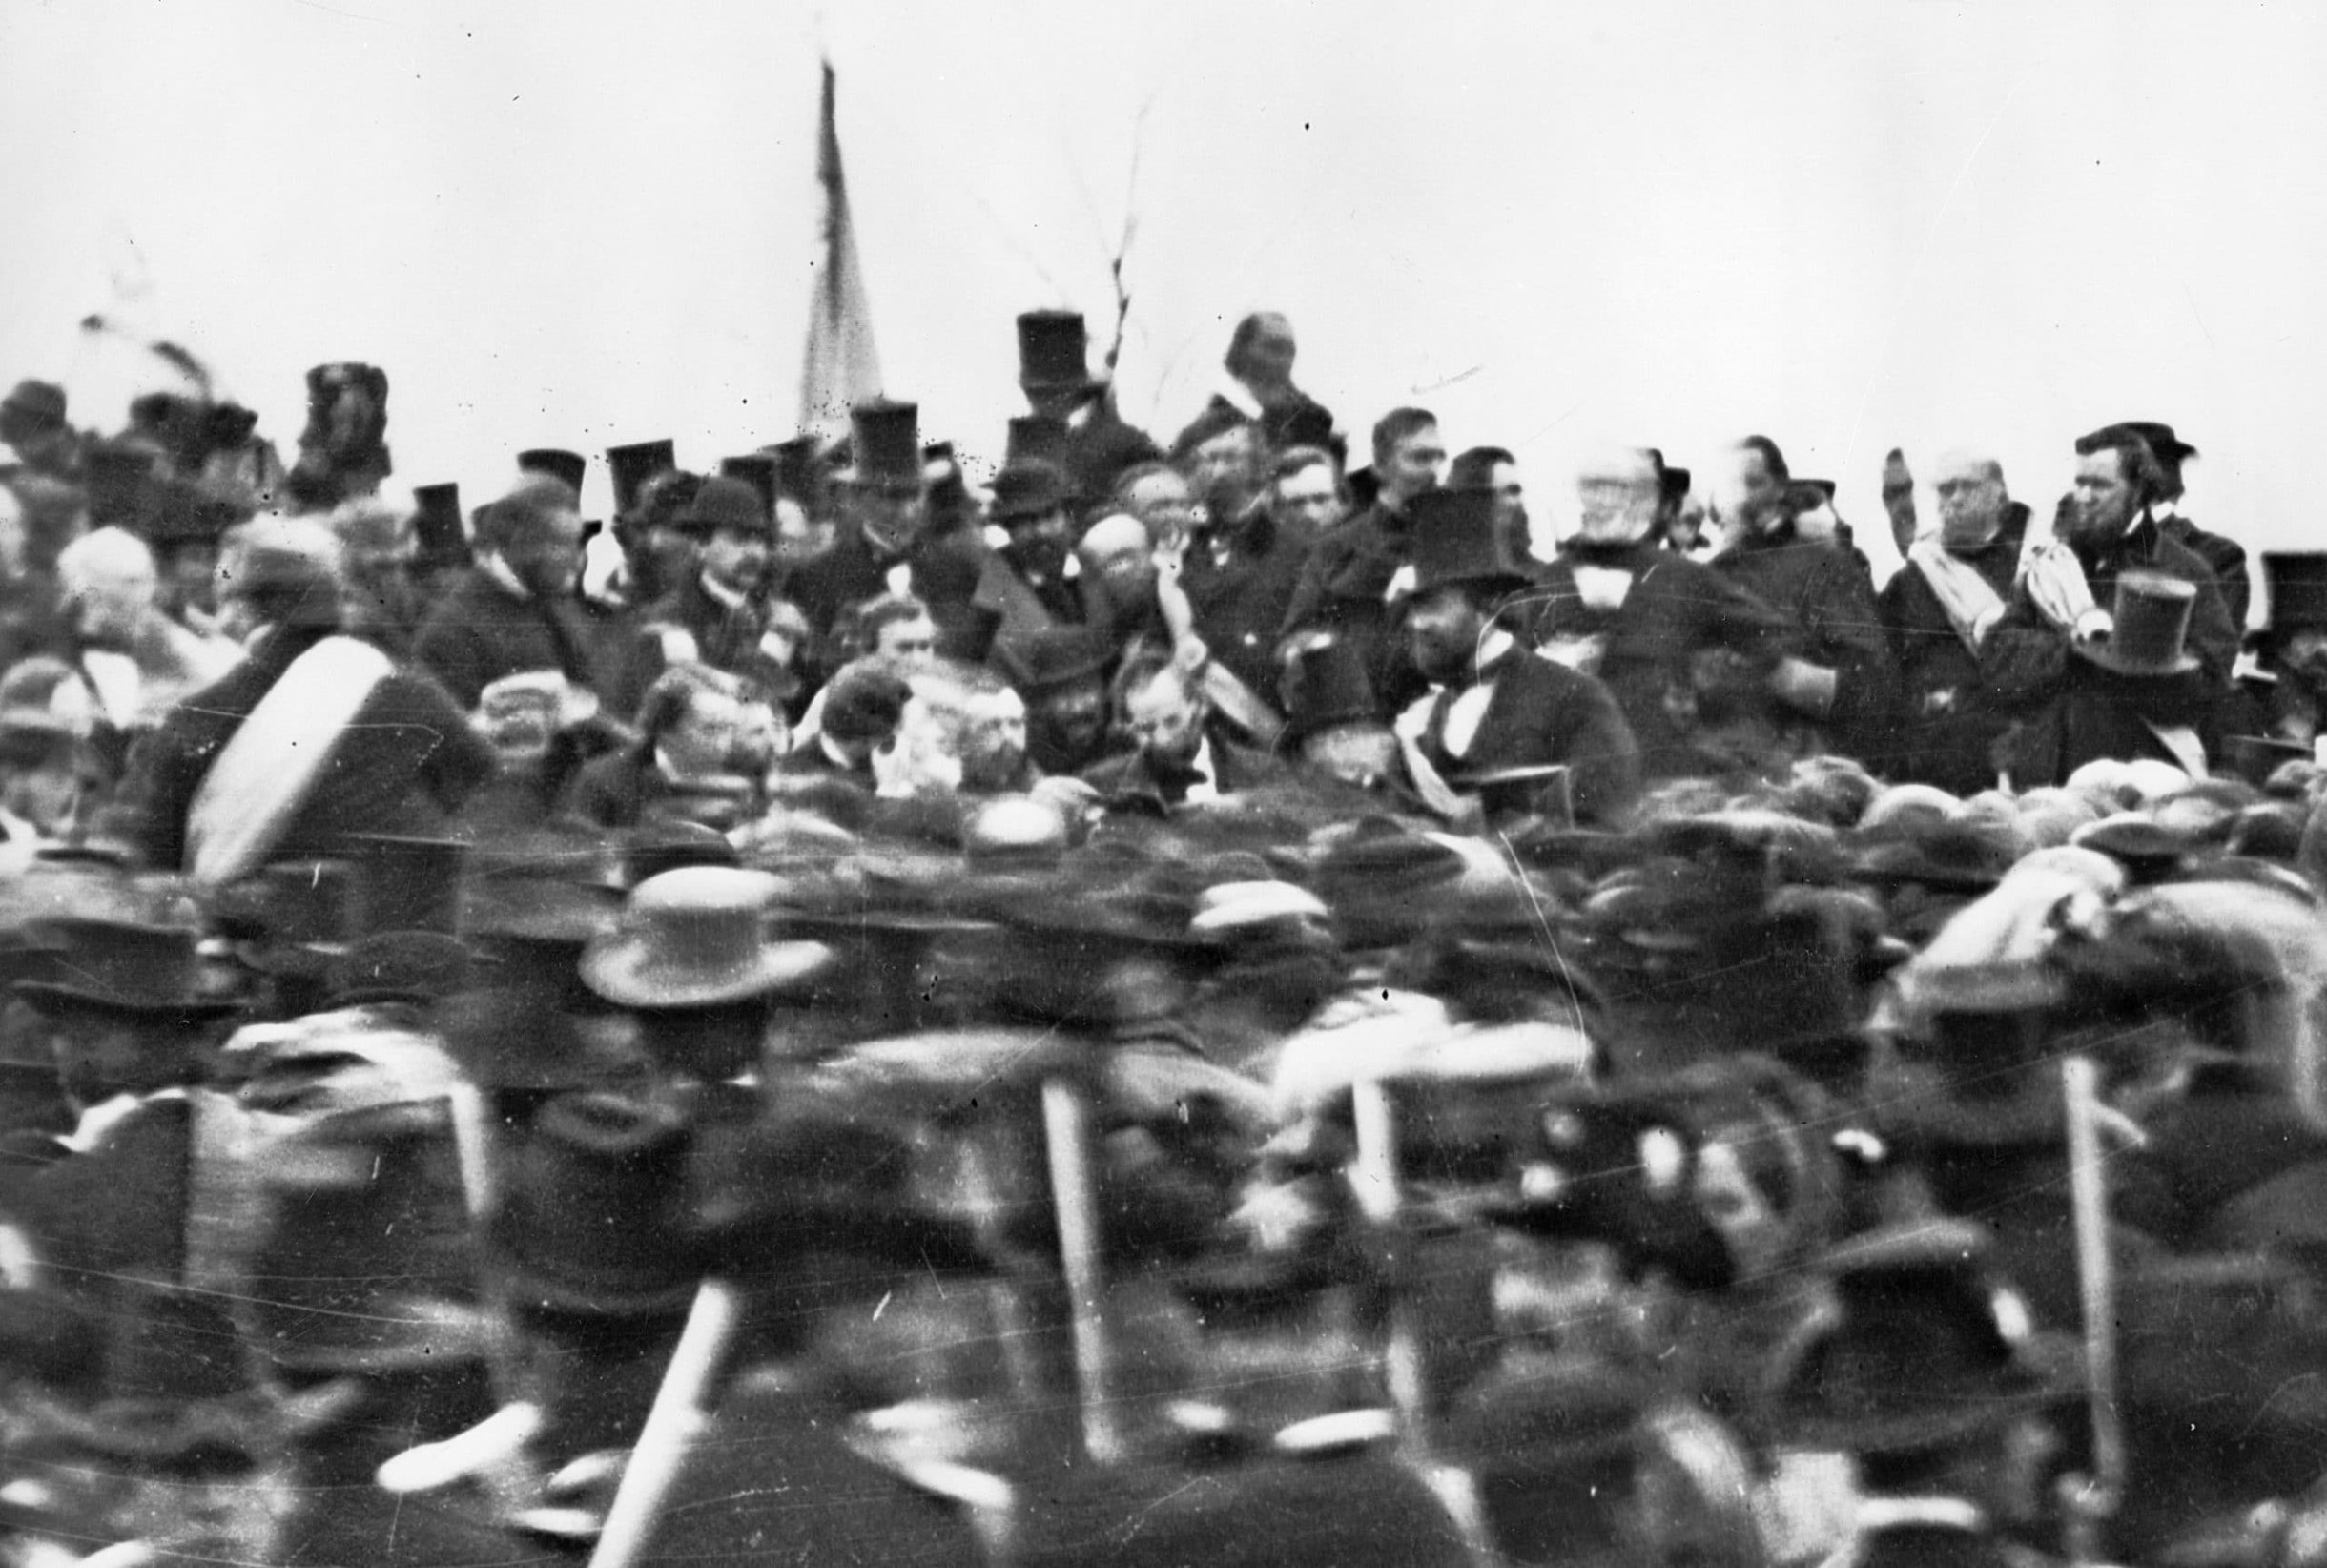 Abraham Lincoln preparing to give the Gettysburg Address